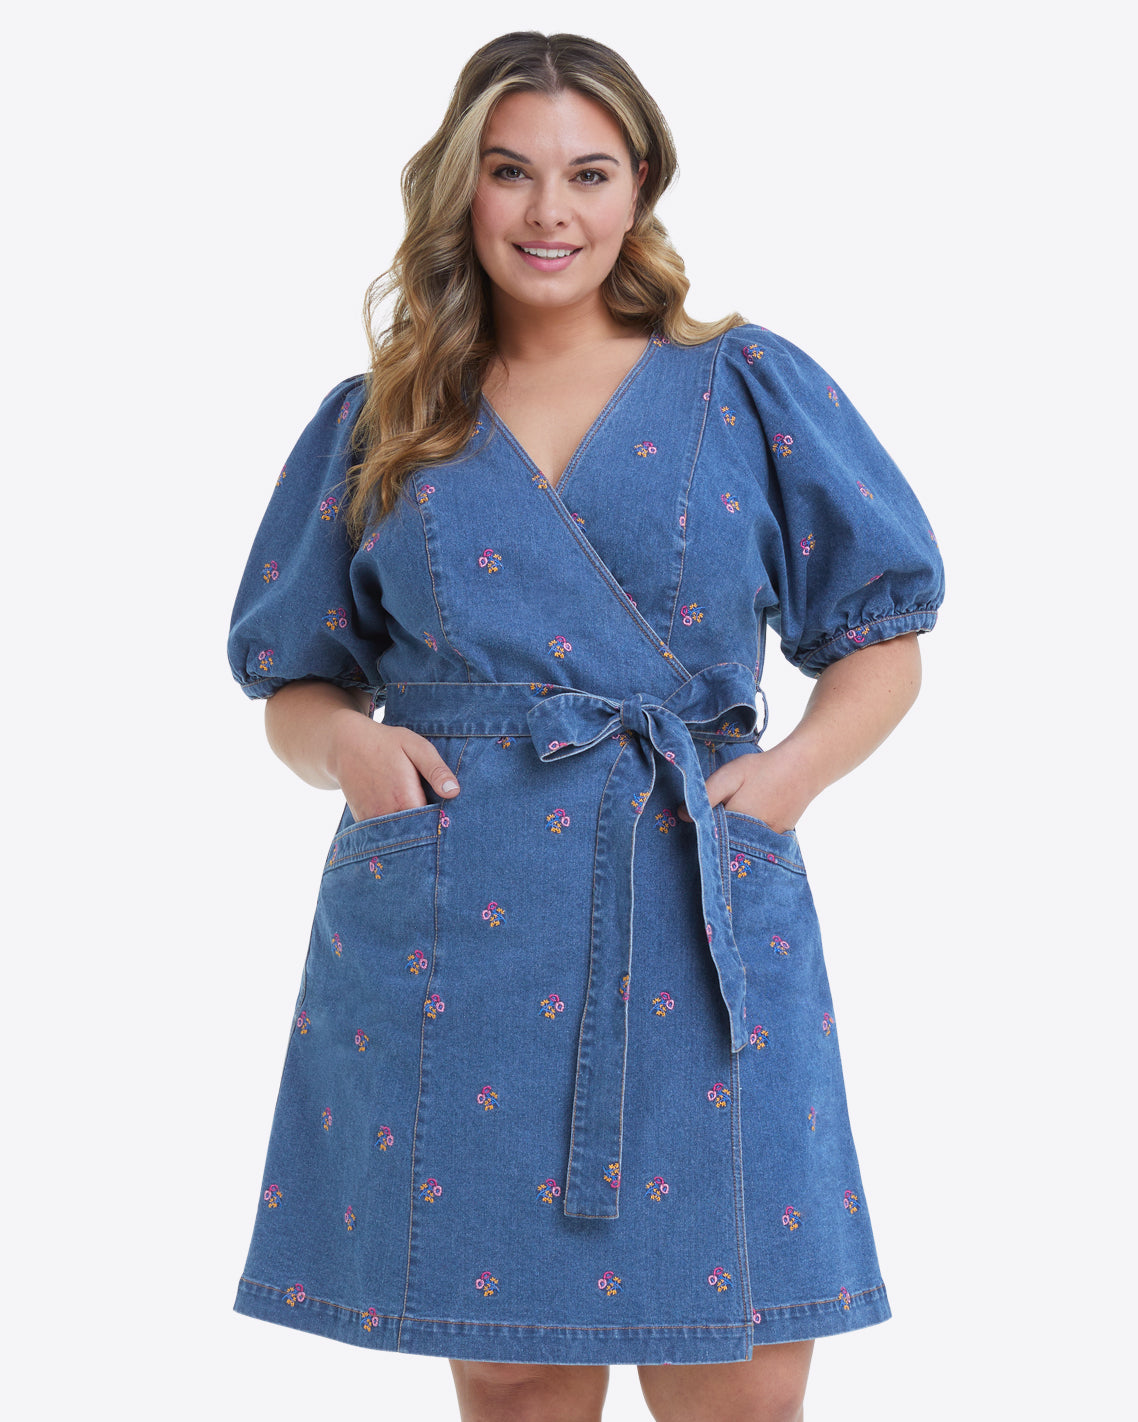 Wrap Dress in Embroidered Posy